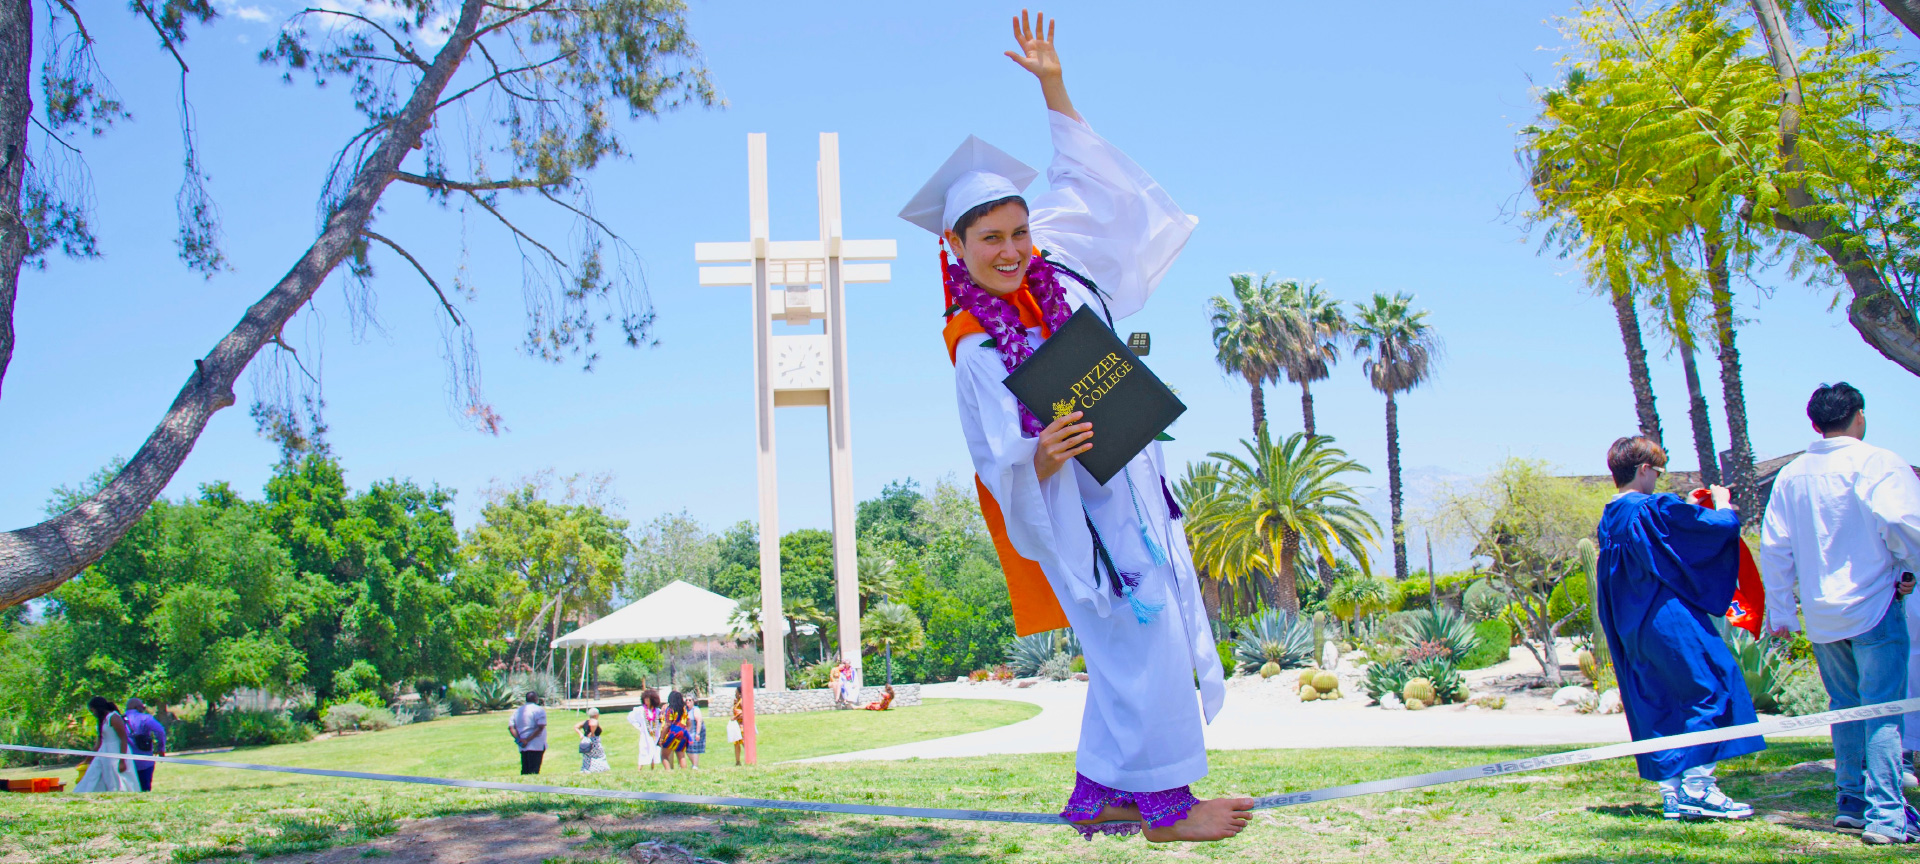 Pitzer graduate balances on a tightrope while holding diploma